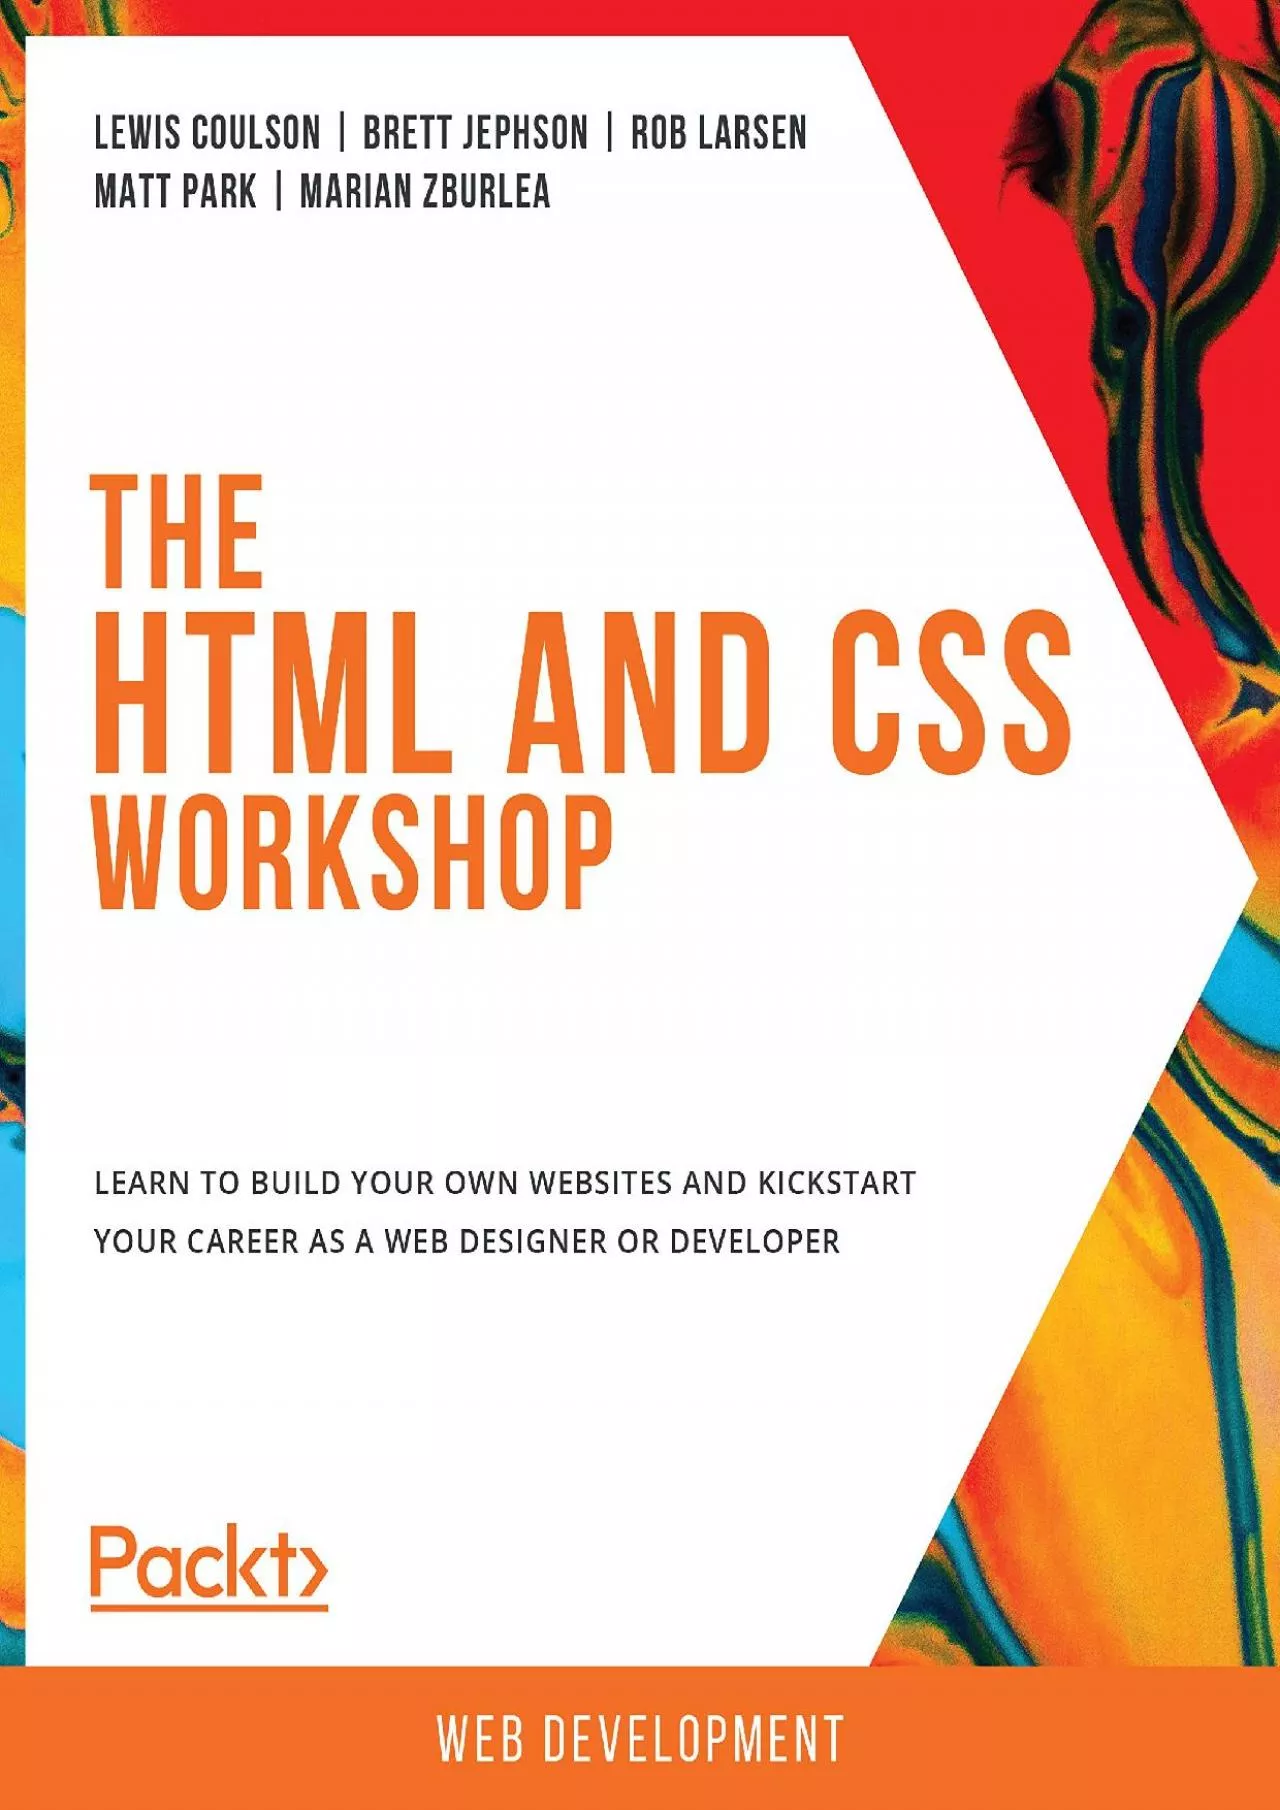 [BEST]-The HTML and CSS Workshop: Learn to build your own websites and kickstart your